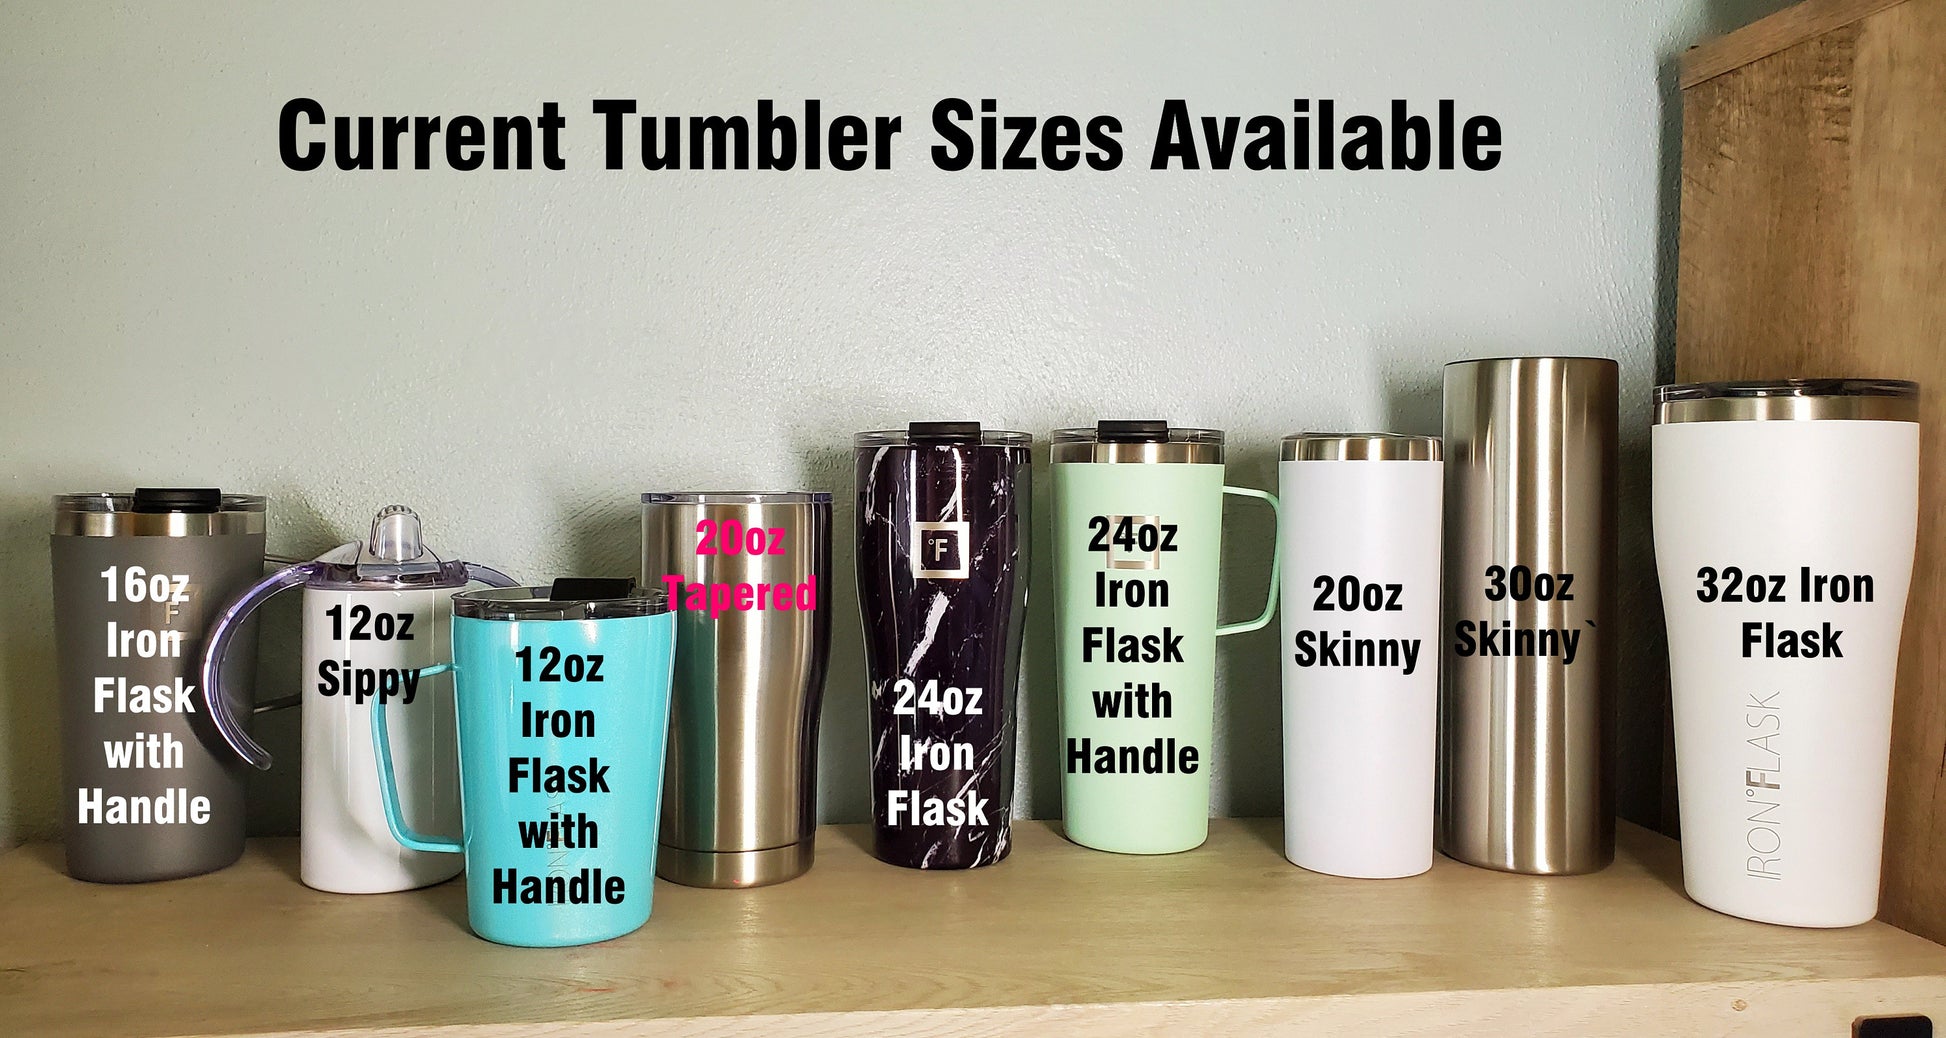 PIXISS 20oz. Stainless Steel Beverage Tumblers